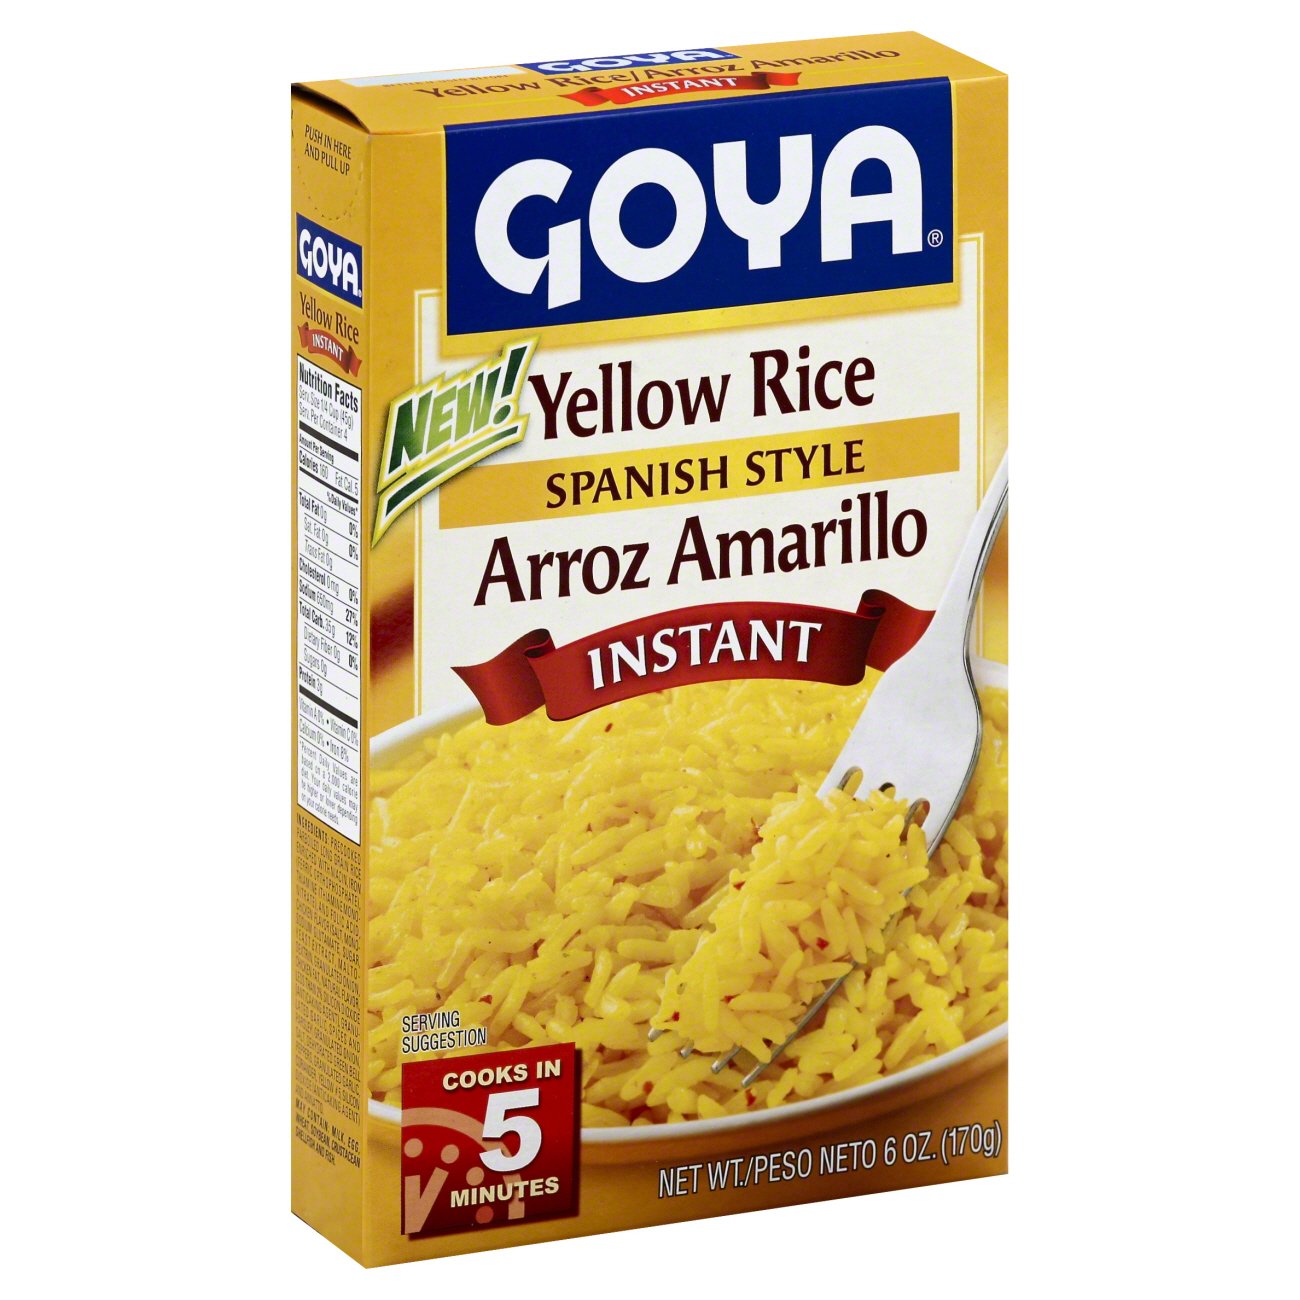 Goya Spanish Style Arroz Amarillo Yellow Rice Shop Rice Grains At H E B,Baked Red Snapper